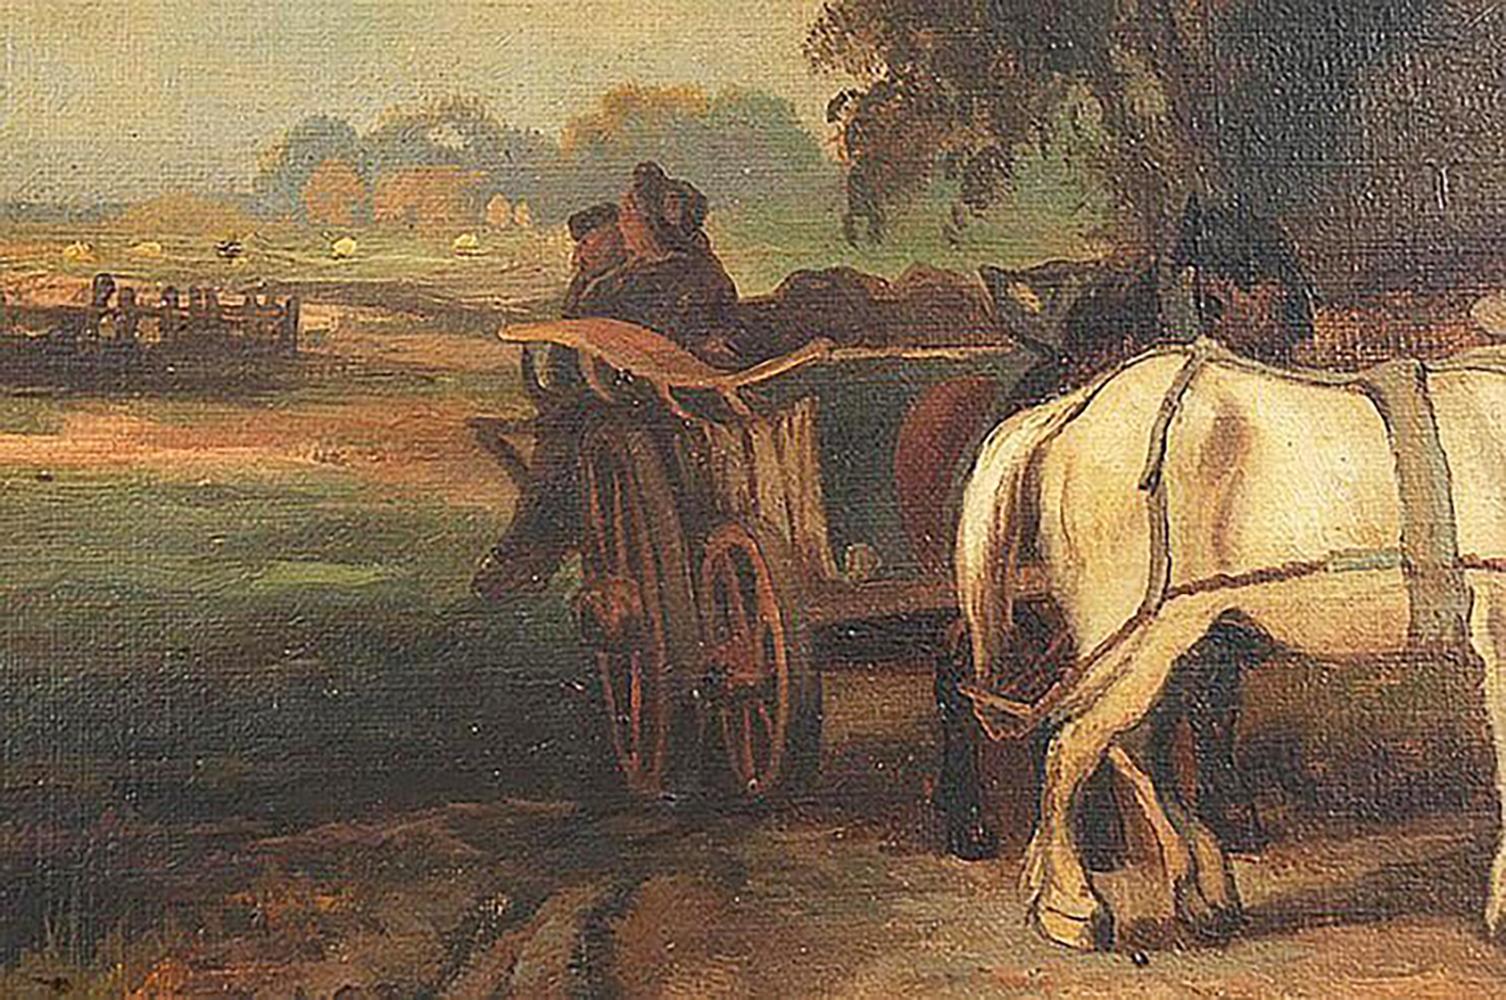 William R. Stone Landscape Oil Painting Entitled “Black Horse Tavern” - Brown Landscape Painting by William Stone